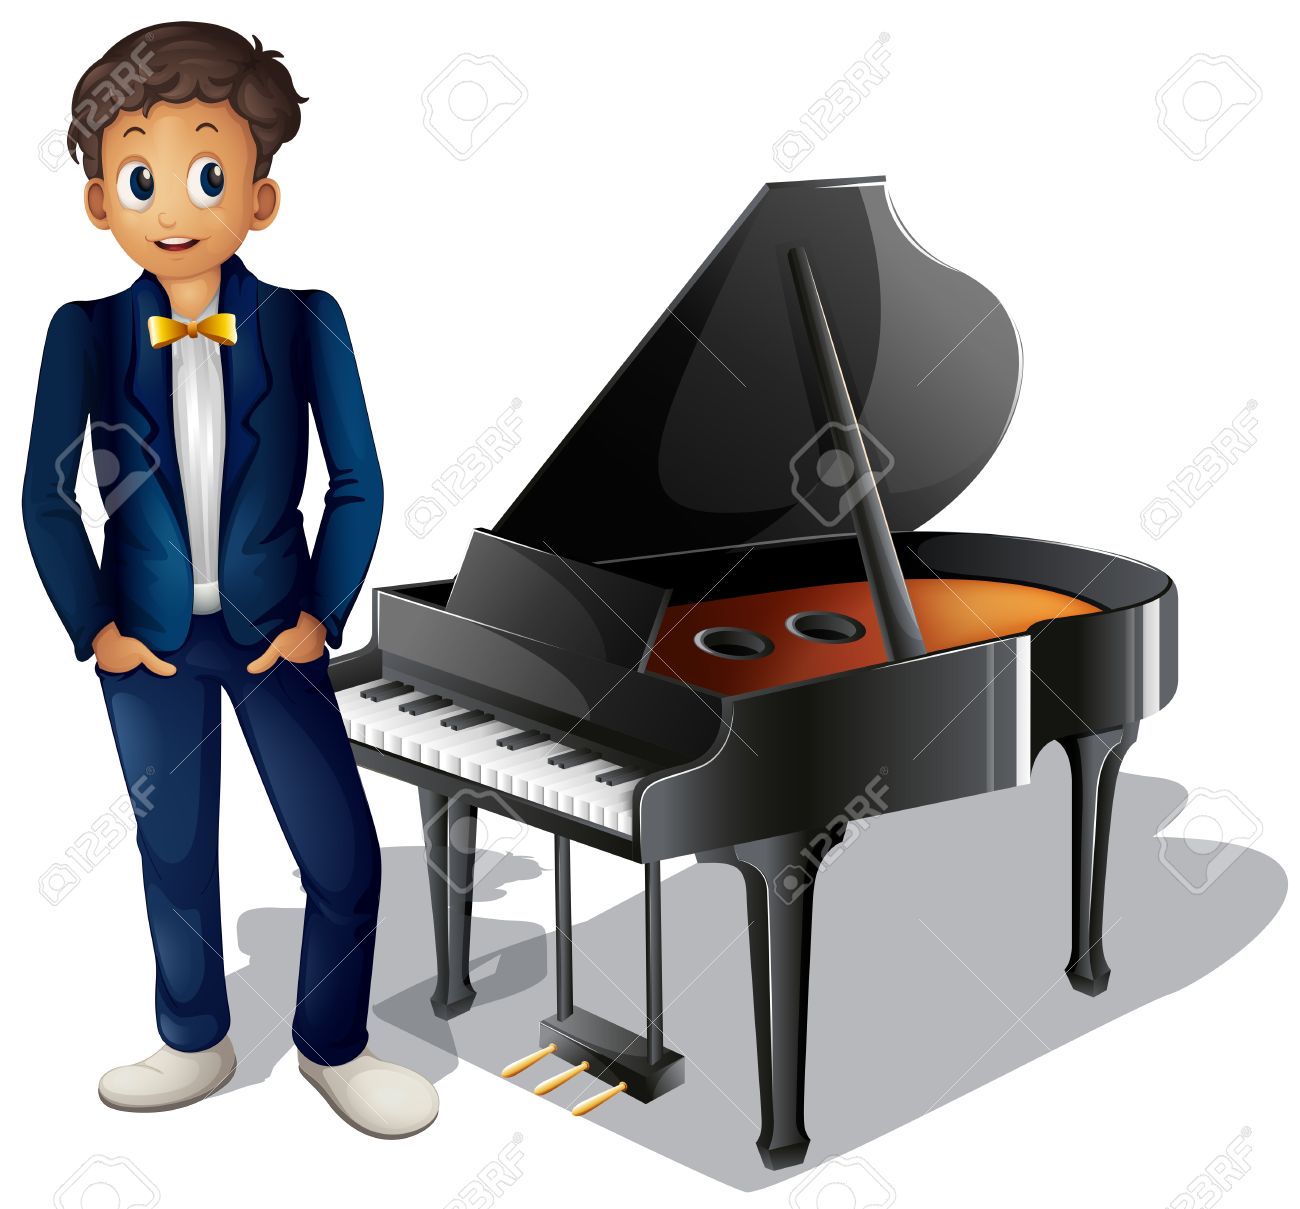 girl playing piano clipart - photo #23